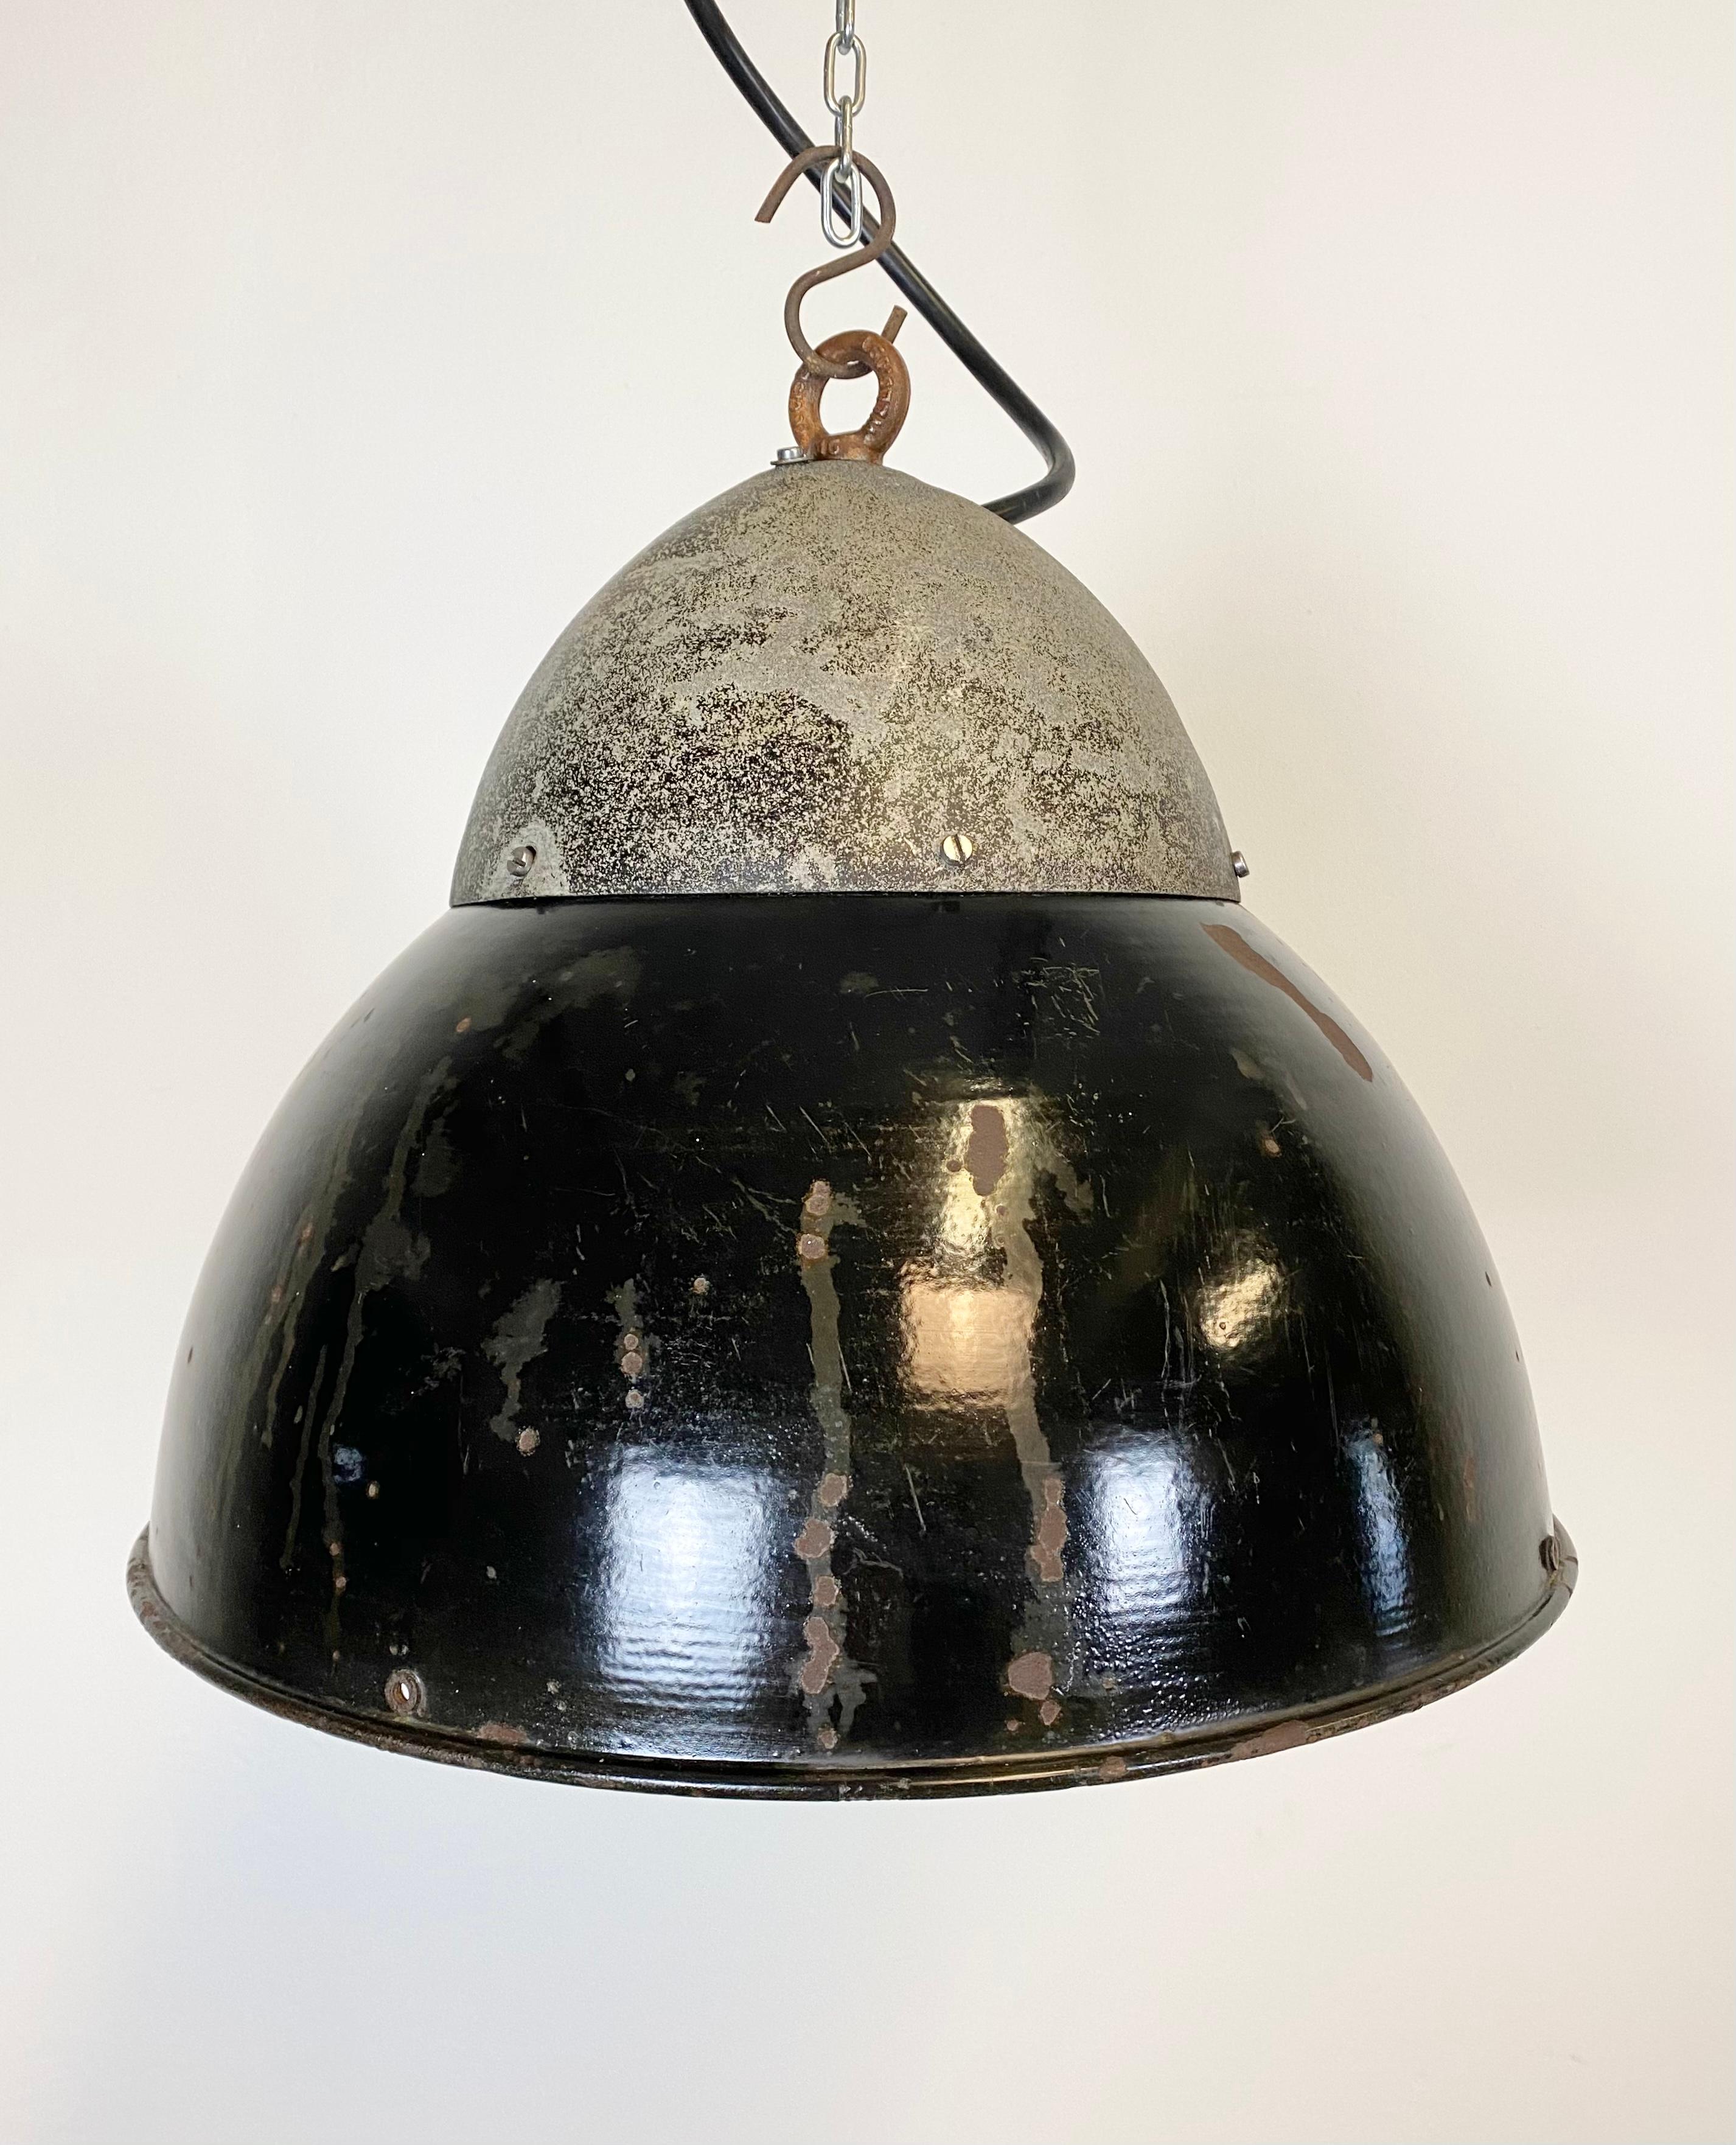 Vintage Industrial hanging lamp from former Czechoslovakia ,made during the 1930s. The lamp has a grey iron dome and a black enamel lampshade. White interior.. New porcelain socket for E27 lightbulbs. New wire. Fully functional. Weight: 2.5 kg.